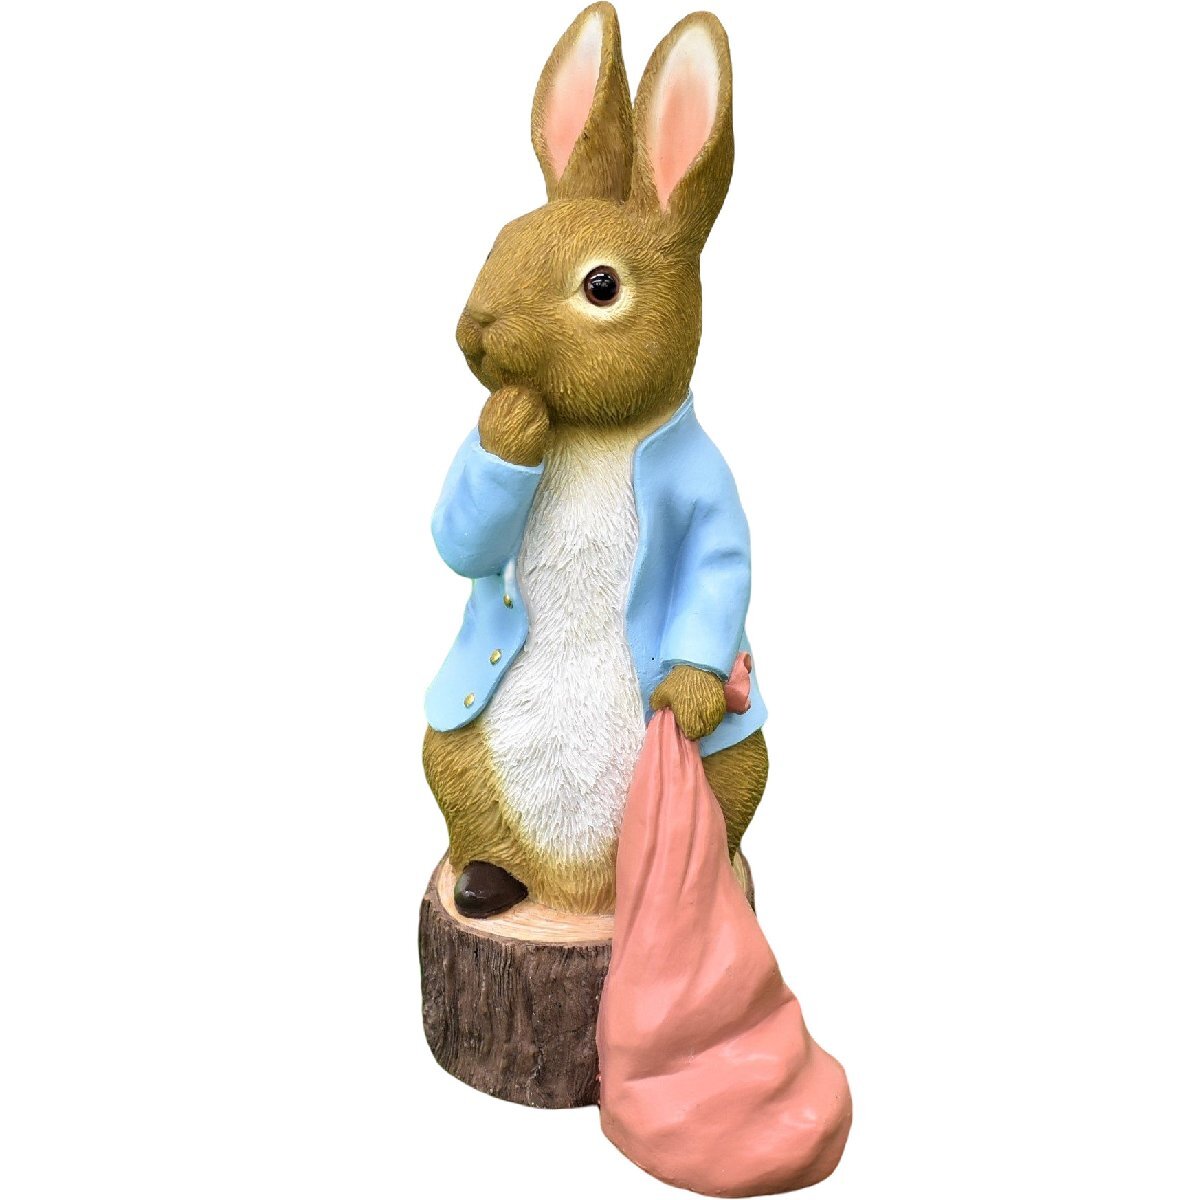 Long loved around the world, Peter Rabbit figurine, object, mother's scarf, 12 x 15 x height 30 cm, faithfully reproduced as in the picture book, Handmade items, interior, miscellaneous goods, ornament, object